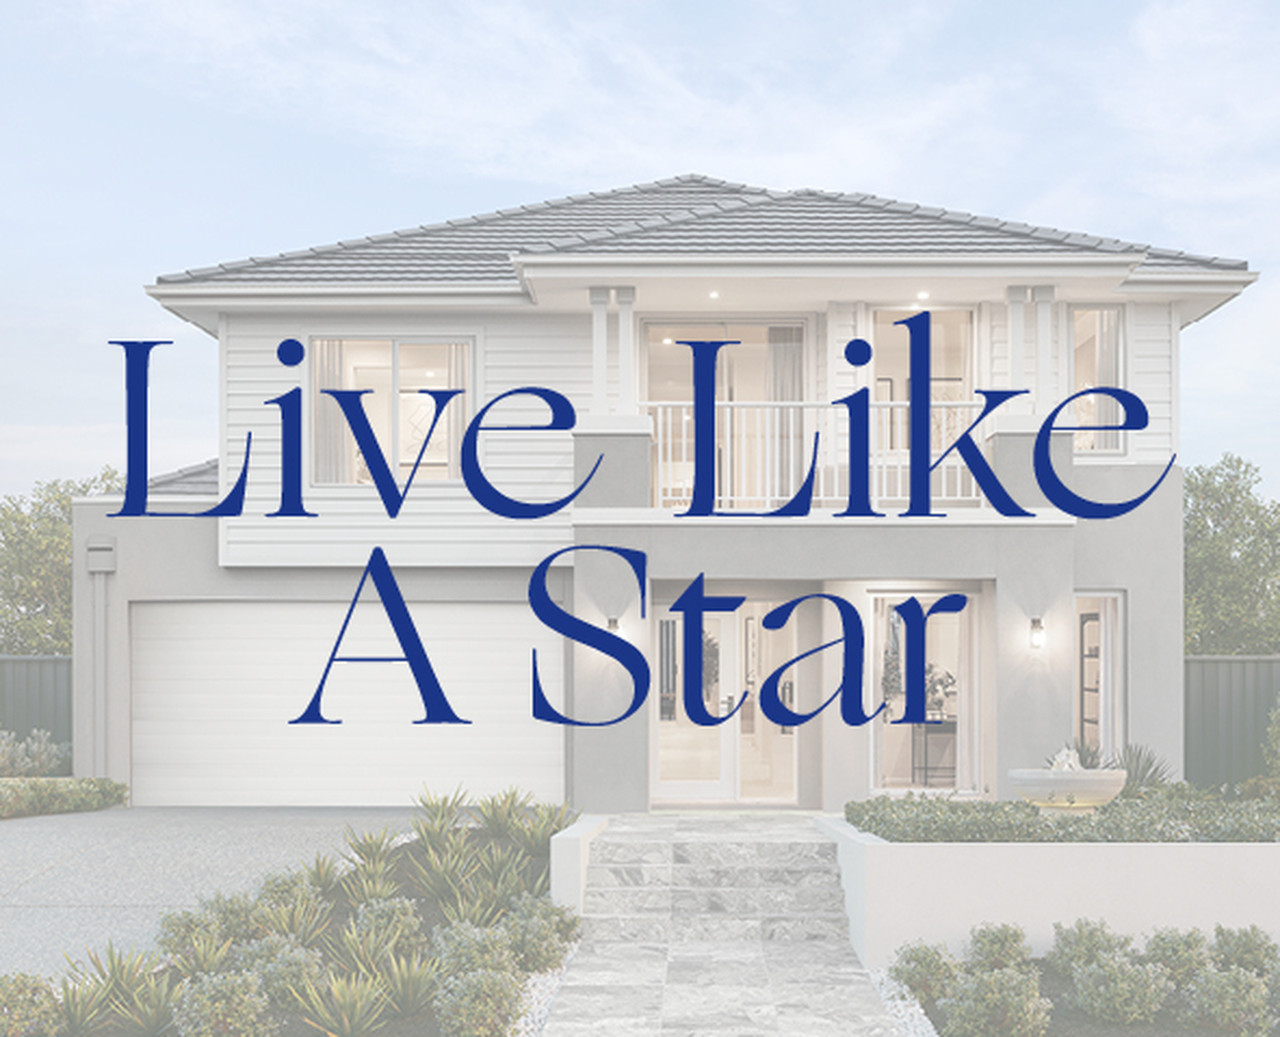 CH24_0054 - CAMPAIGN - Live Like A Star_Current Offers Tile_592 x 480_2.jpg